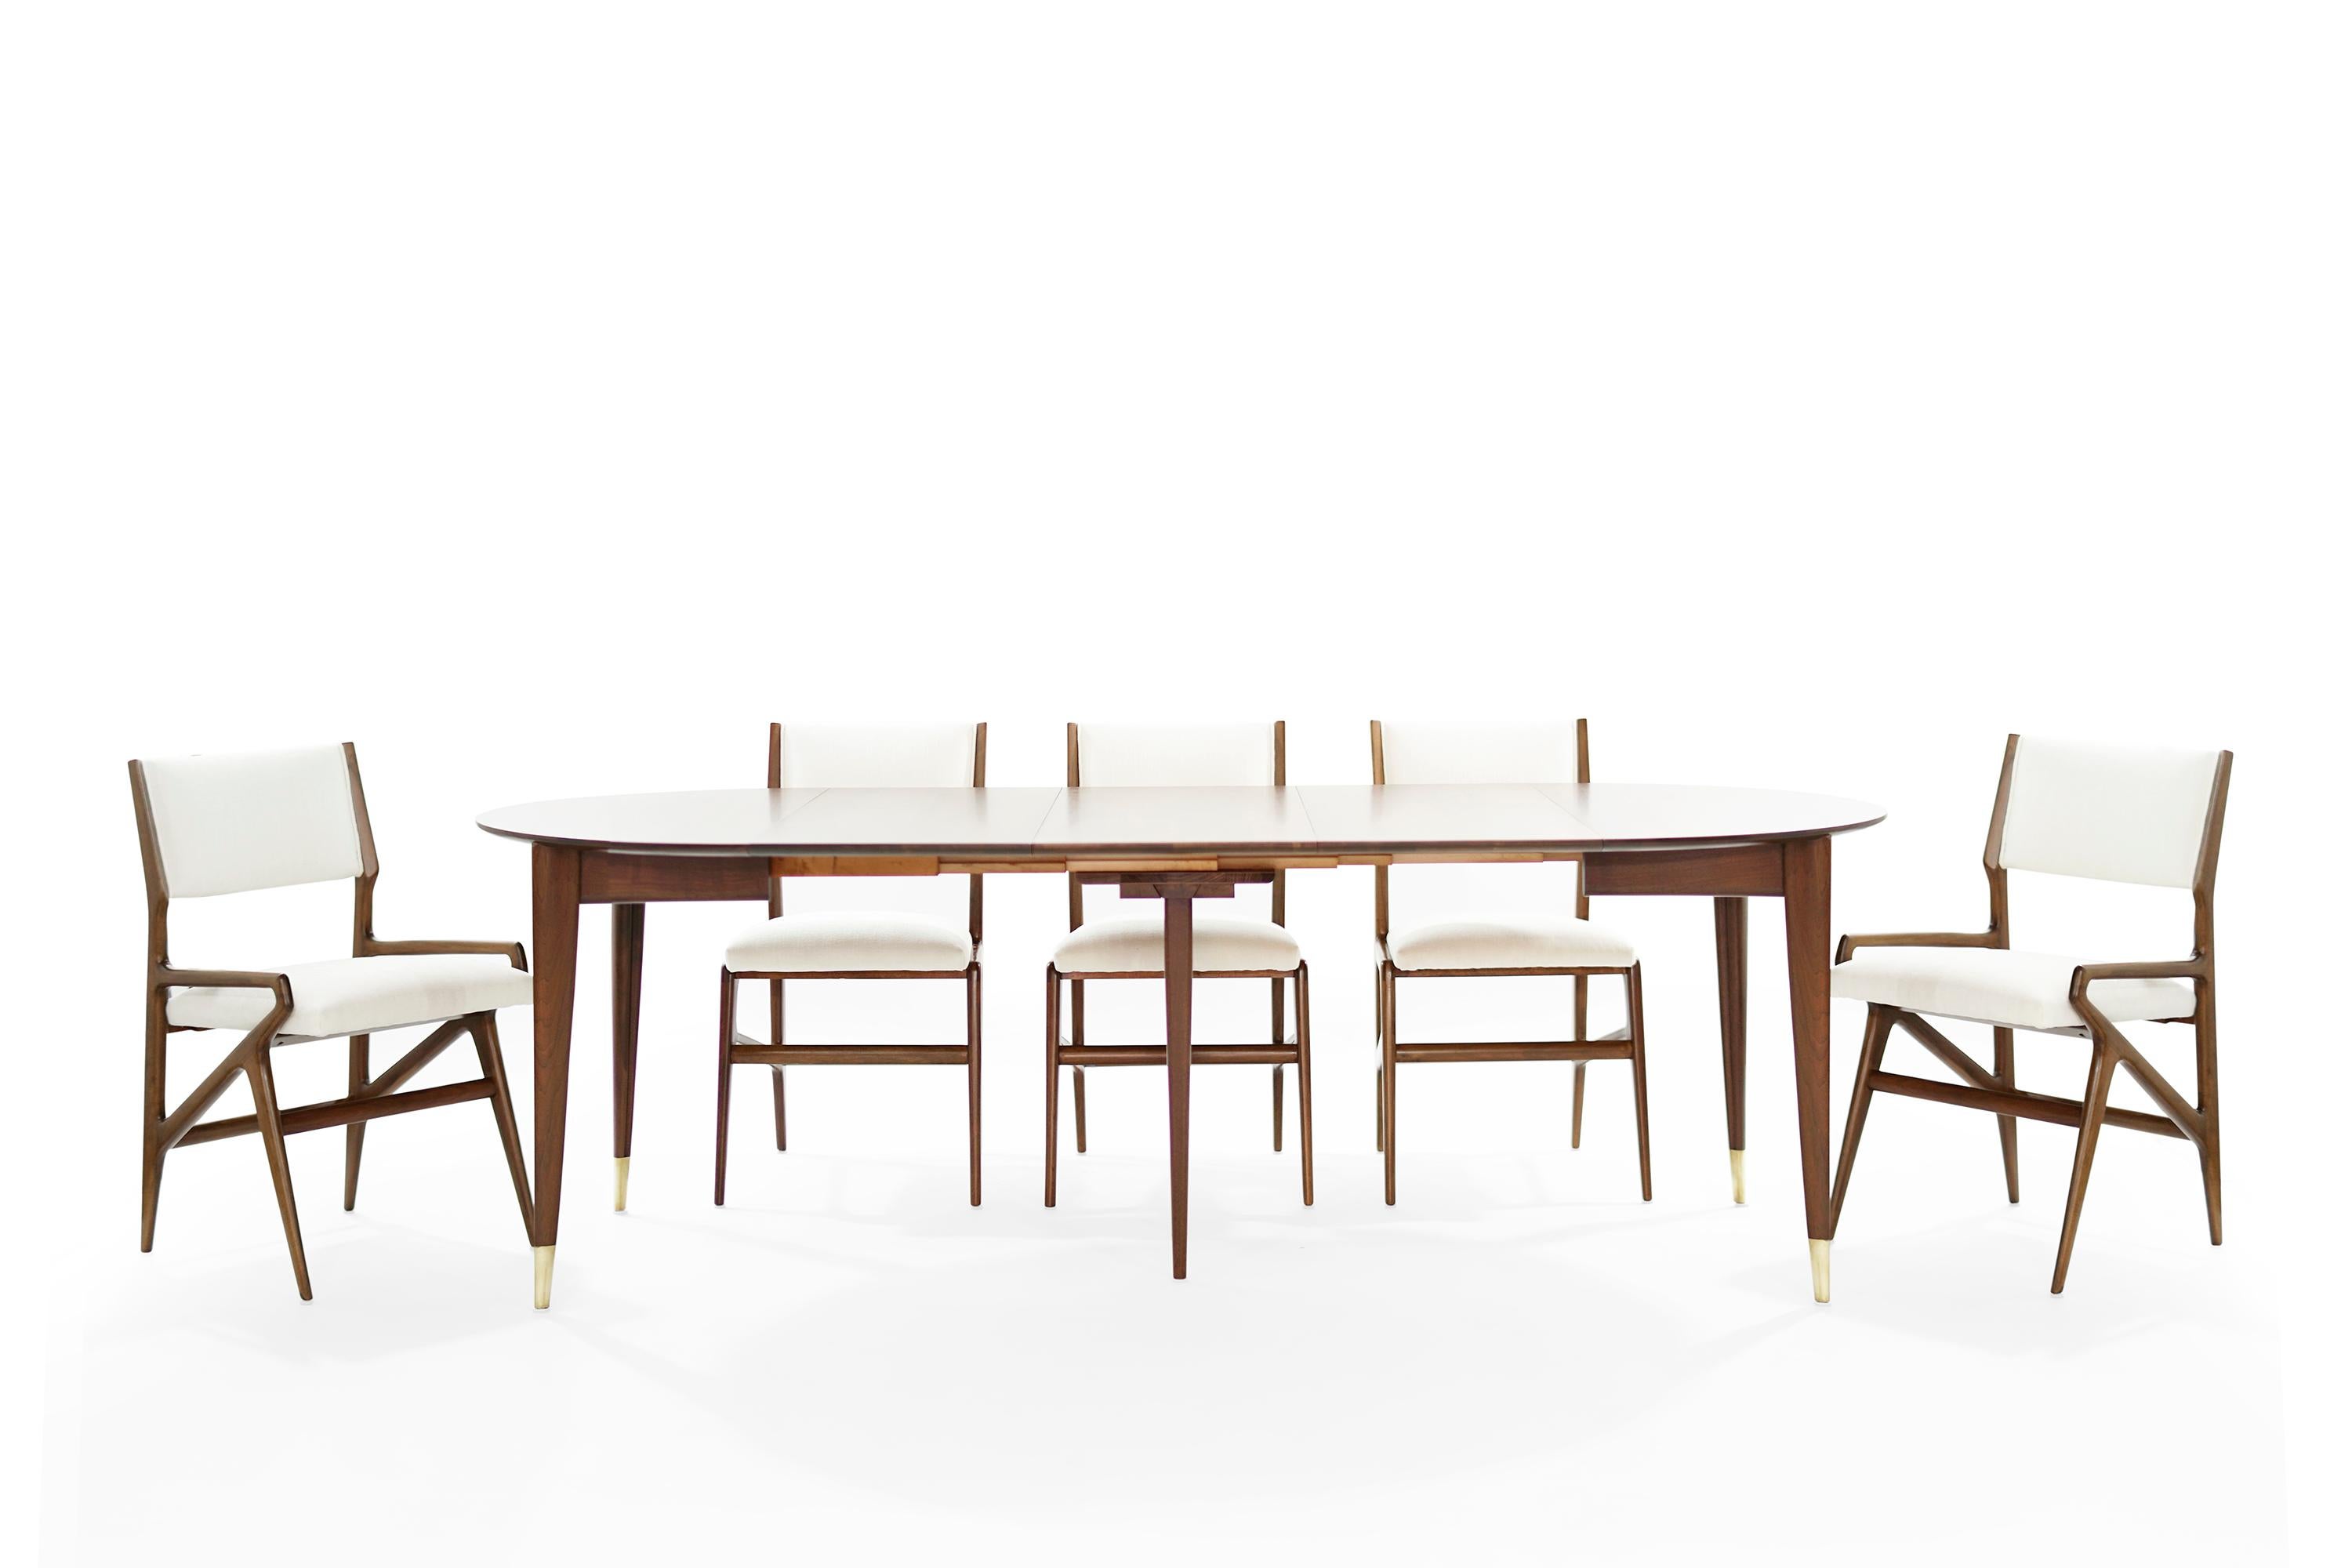 Mid-Century Modern Dining Room Set by Gio Ponti for M. Singer & Sons, circa 1950s